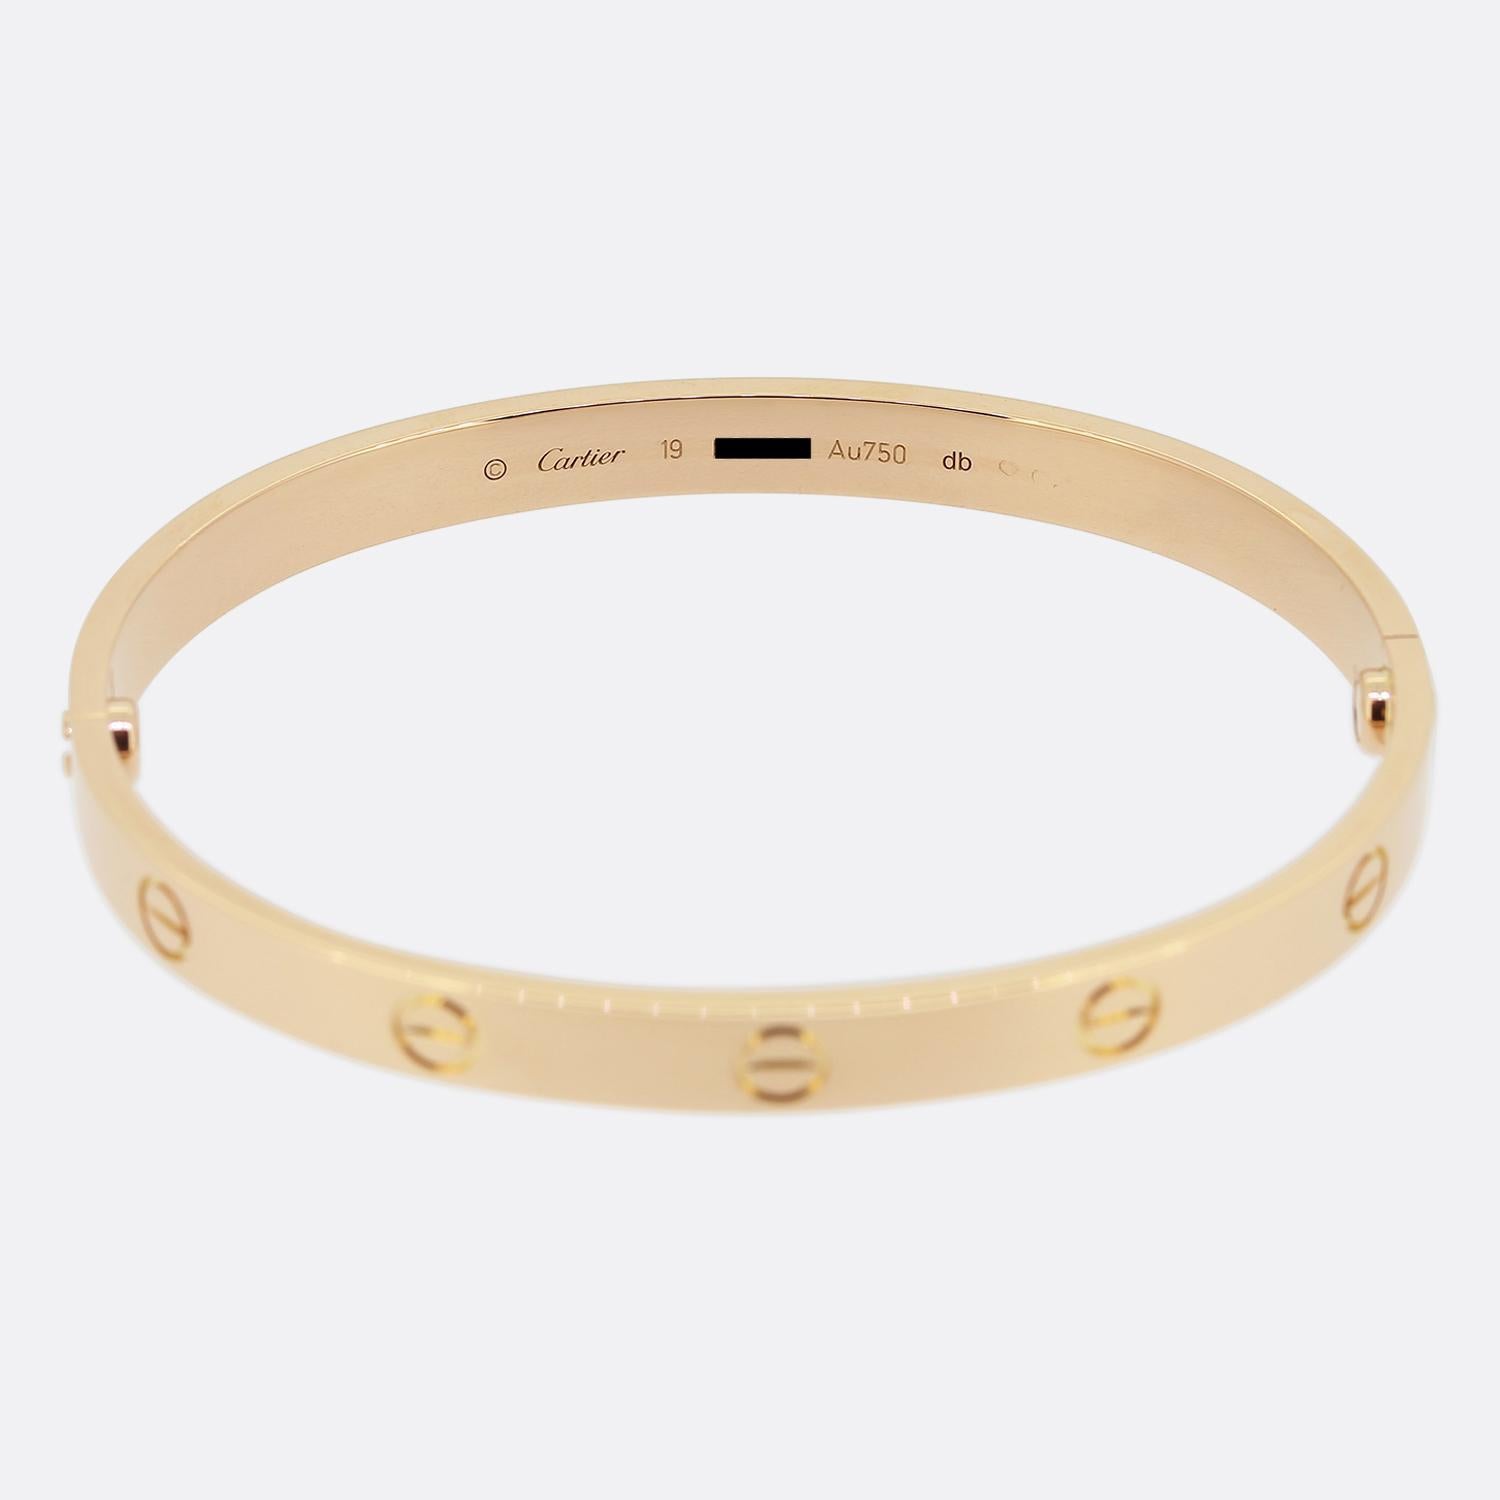 Here we have an 18ct rose gold bangle from the world renowned luxury jewellery house of Cartier. This bangle forms part of the LOVE collection and is one of the most celebrated items of jewellery in the world. This particular model features the